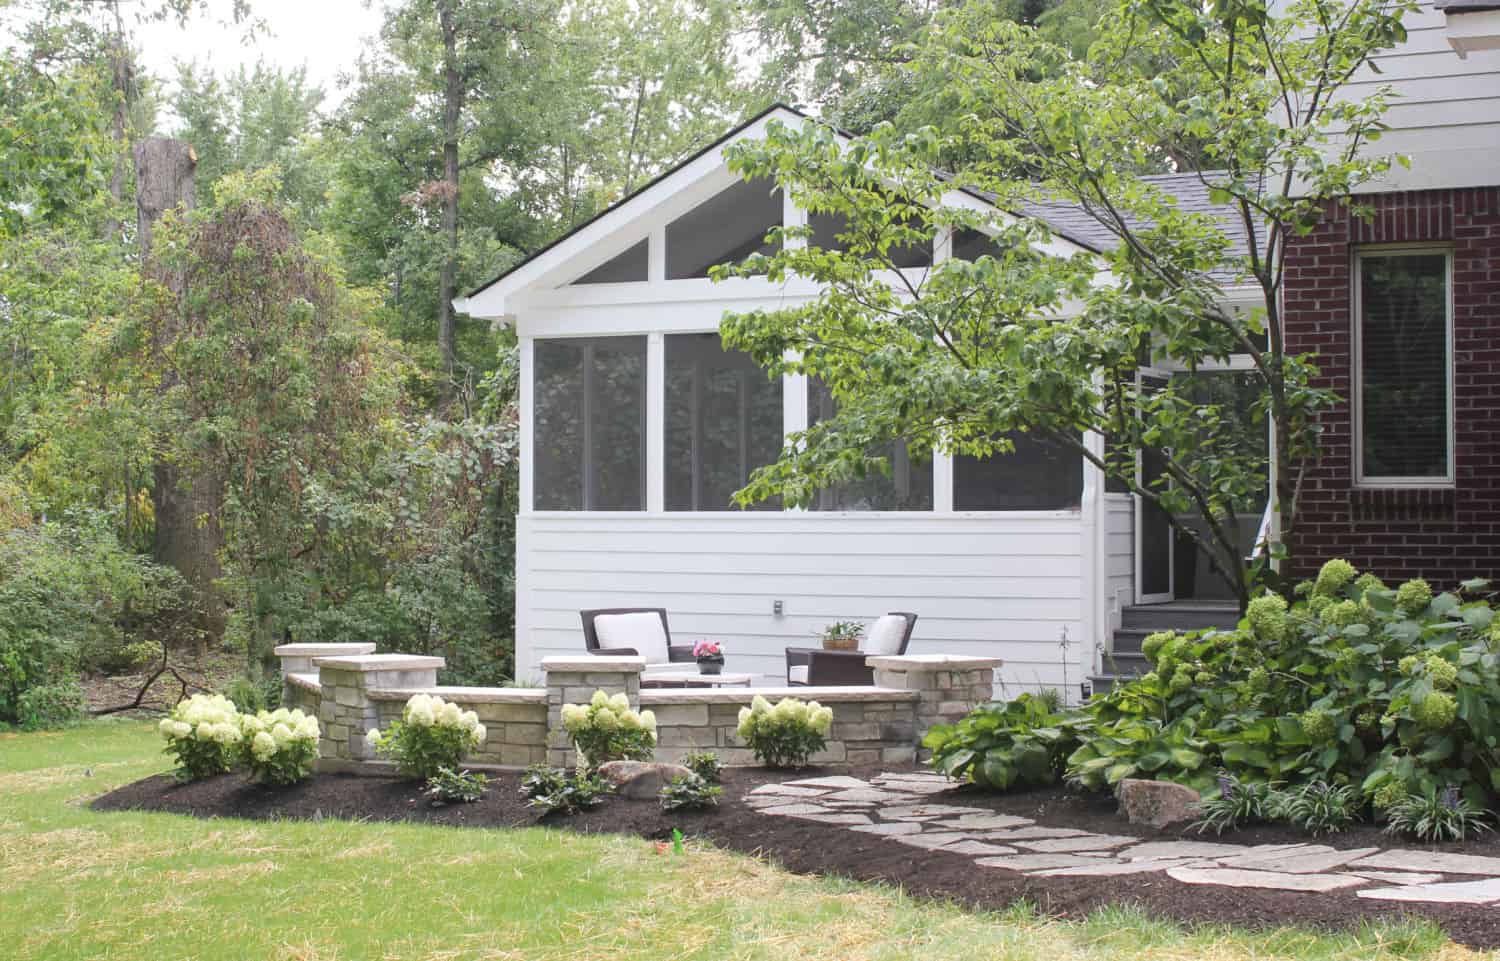 Nicholas Design Build | A backyard with a patio and landscaping.